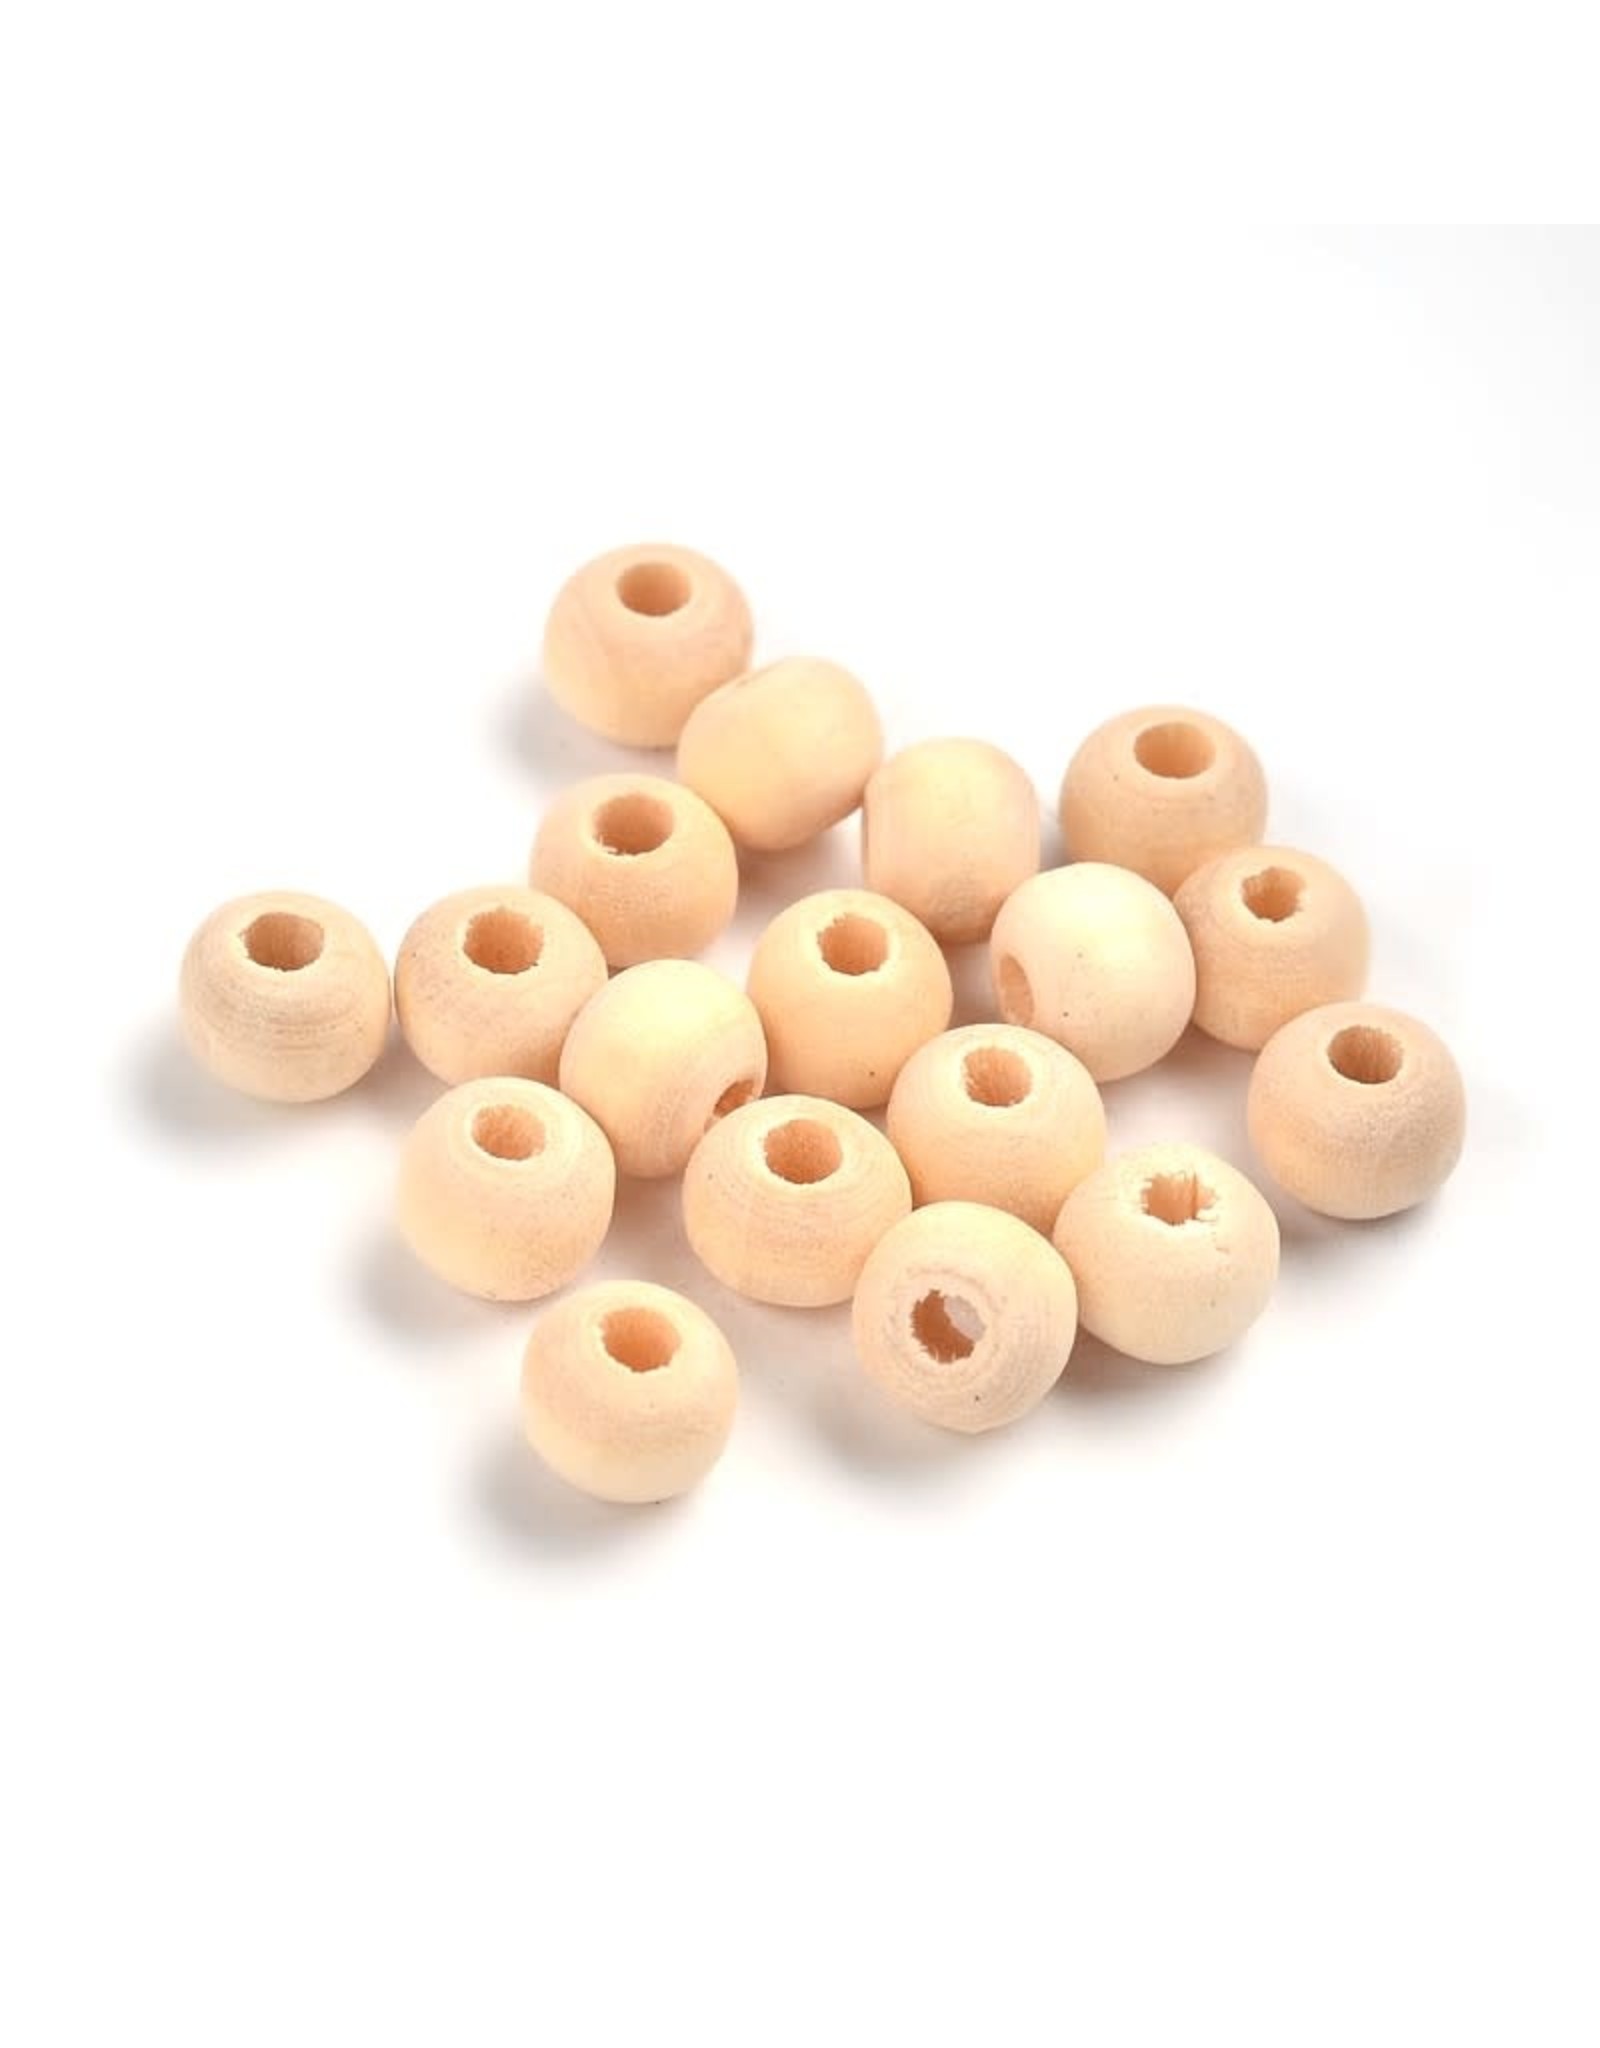 6mm Unfinished Wood Round   Bead  x100